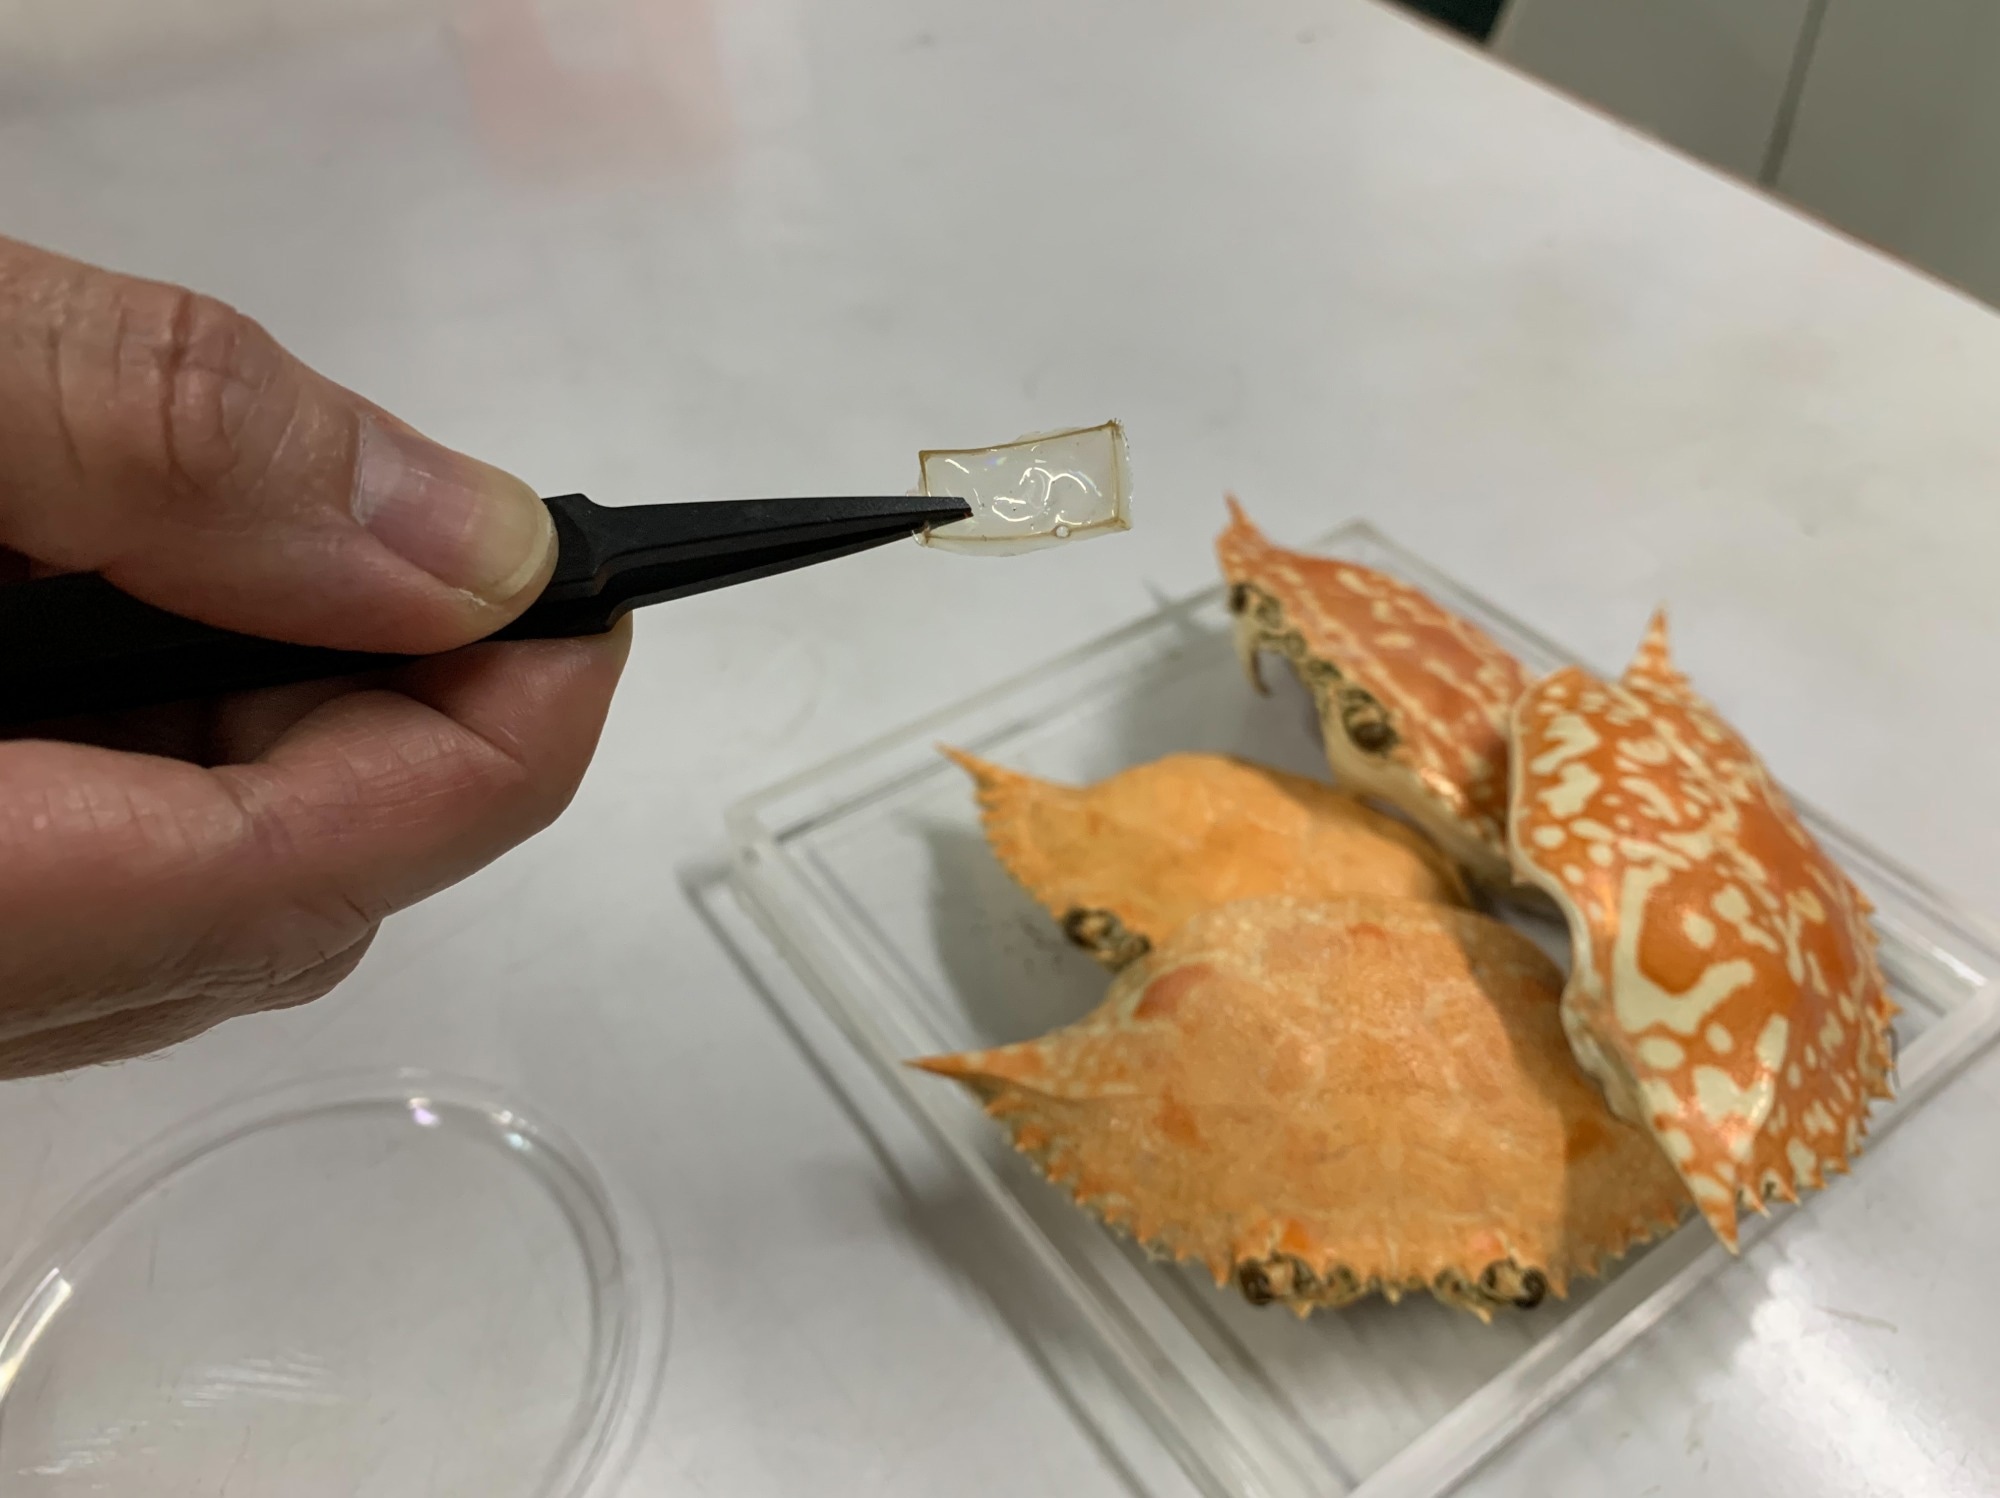 Developing Biodegradable Optical Components from Crab Shells.